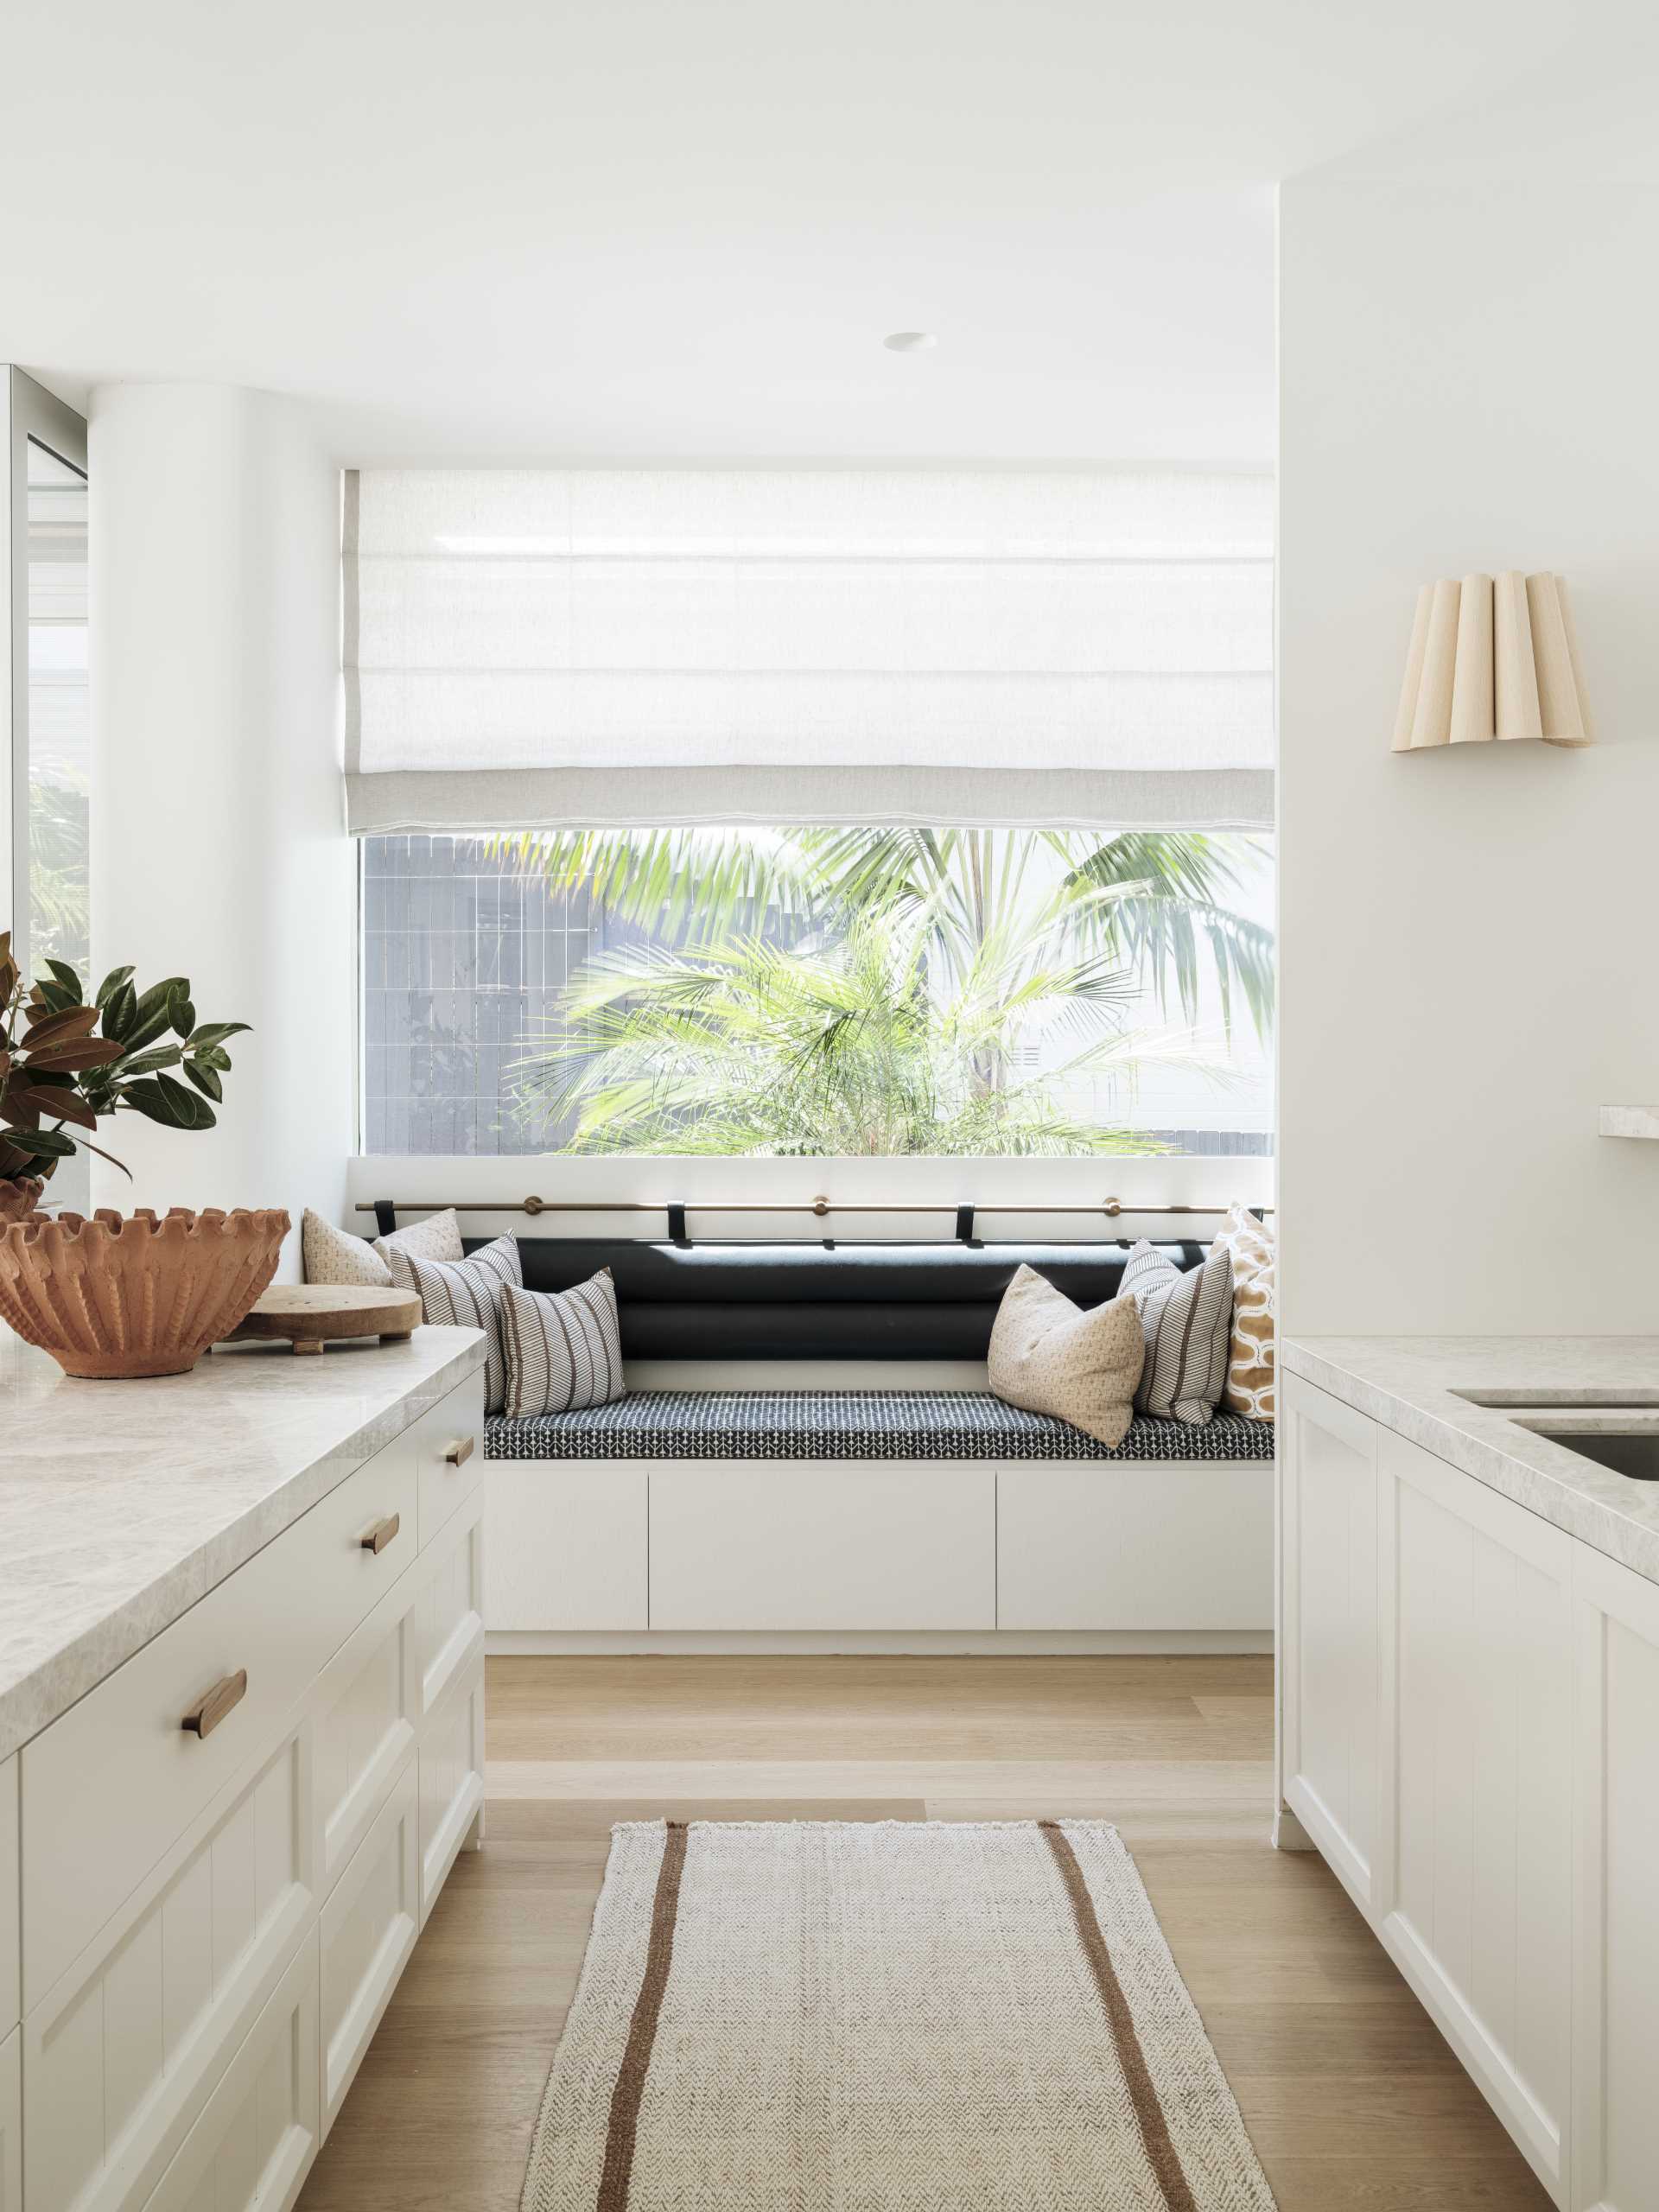 In this kitchen, white cabinets are complemented with a light countertop, while a bench has been placed underneath the nearby window.